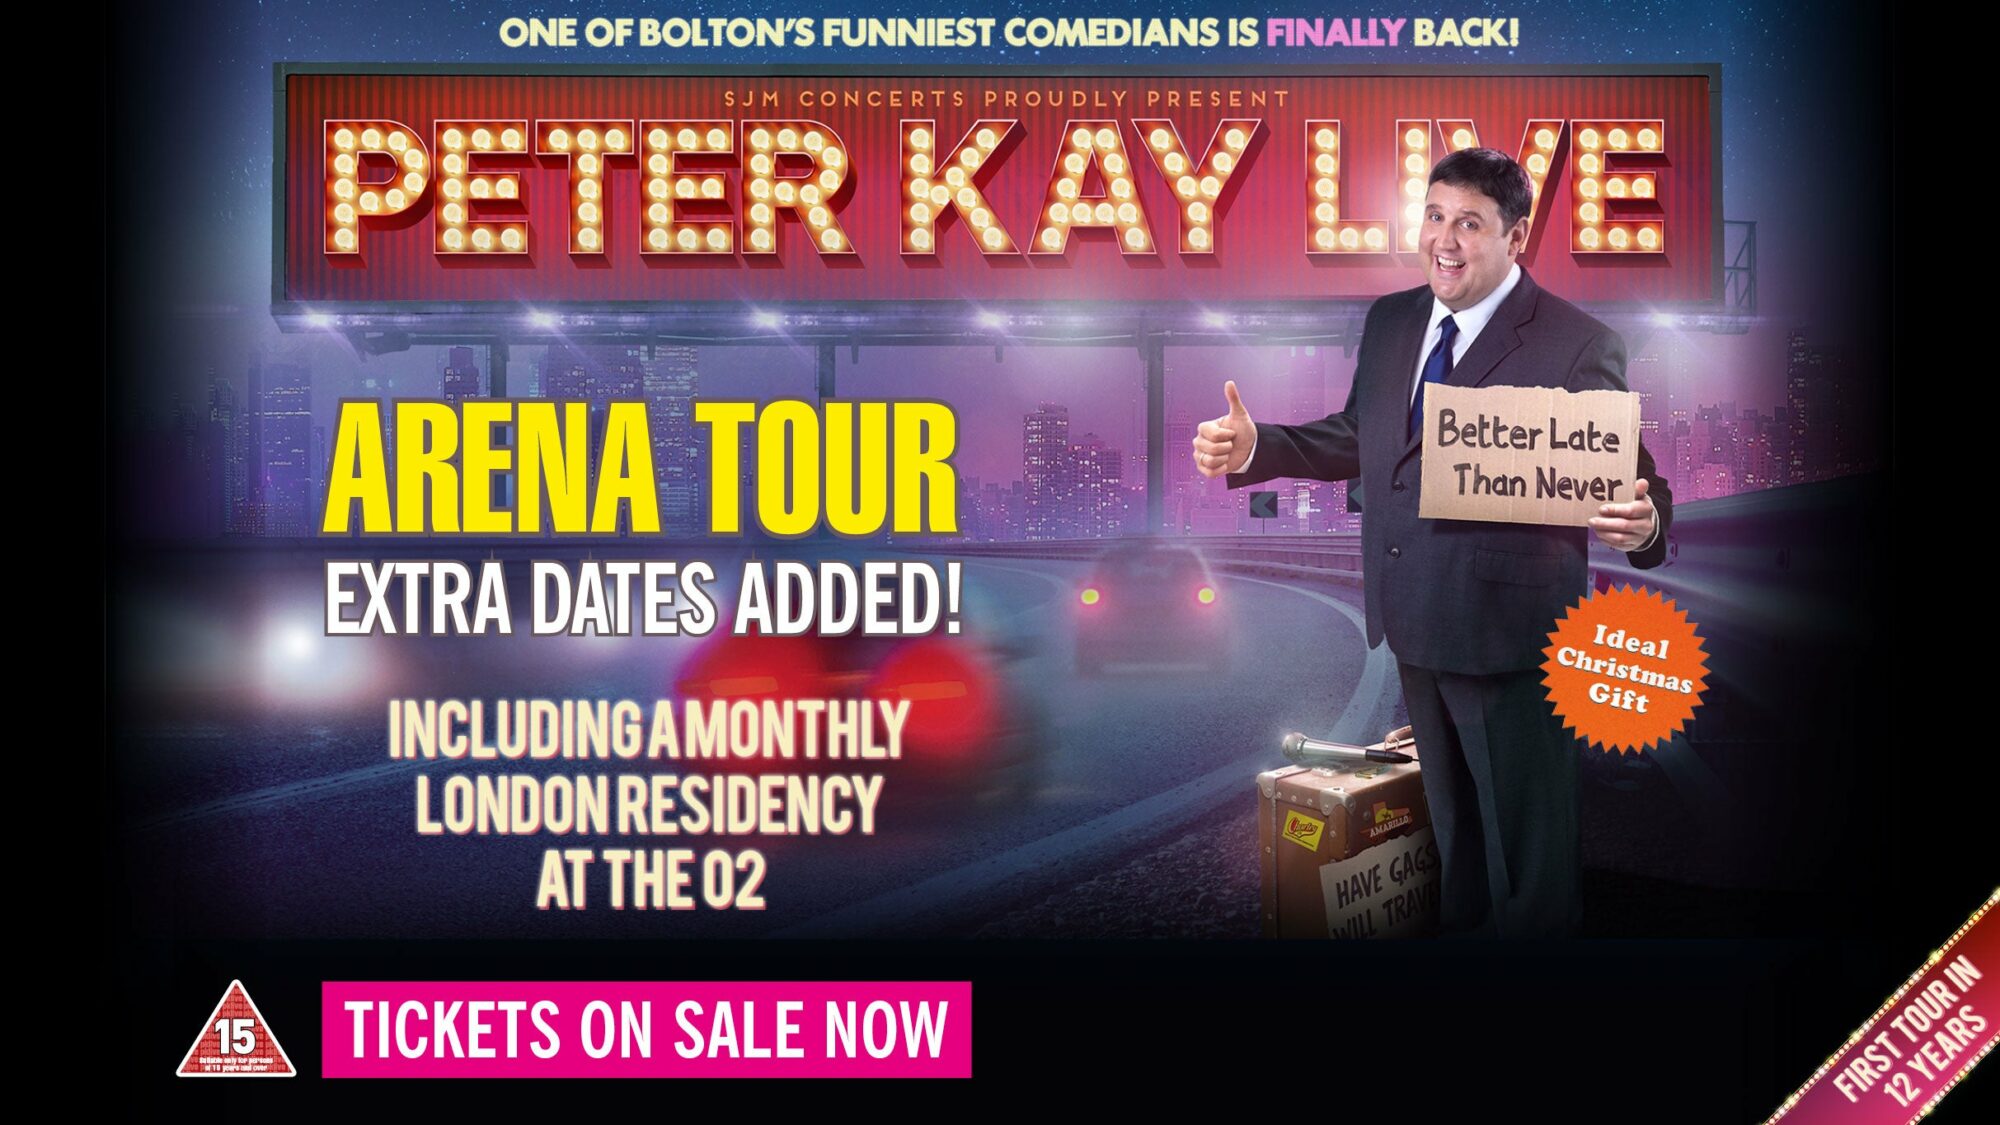 Image name Peter Kay the Gallery at First Direct Arena Leeds the 2 image from the post Peter Kay is coming to Yorkshire in Yorkshire.com.